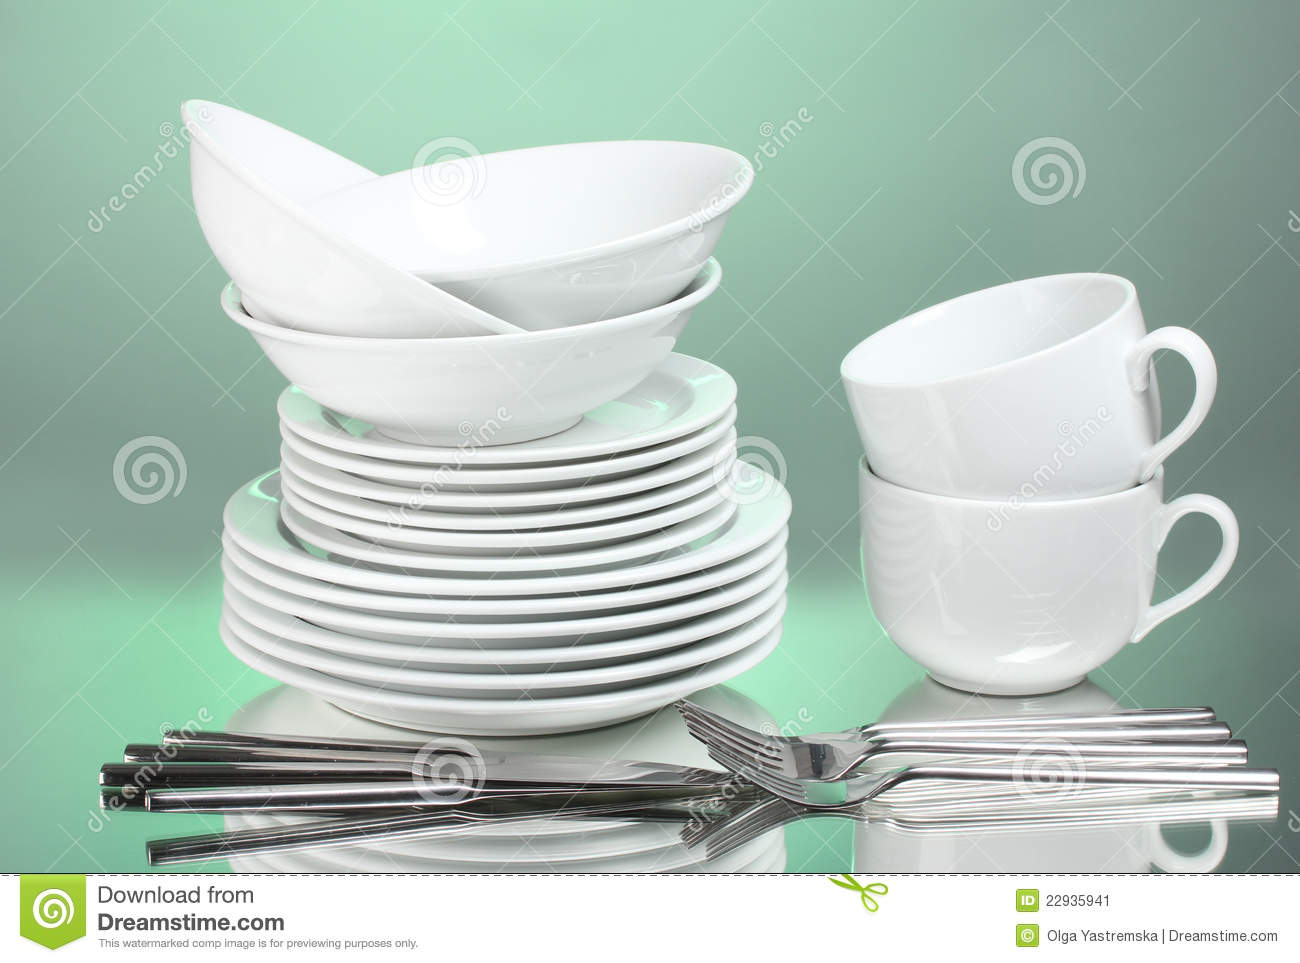 Clean Plates Cups And Cutlery Stock Image   Image  22935941